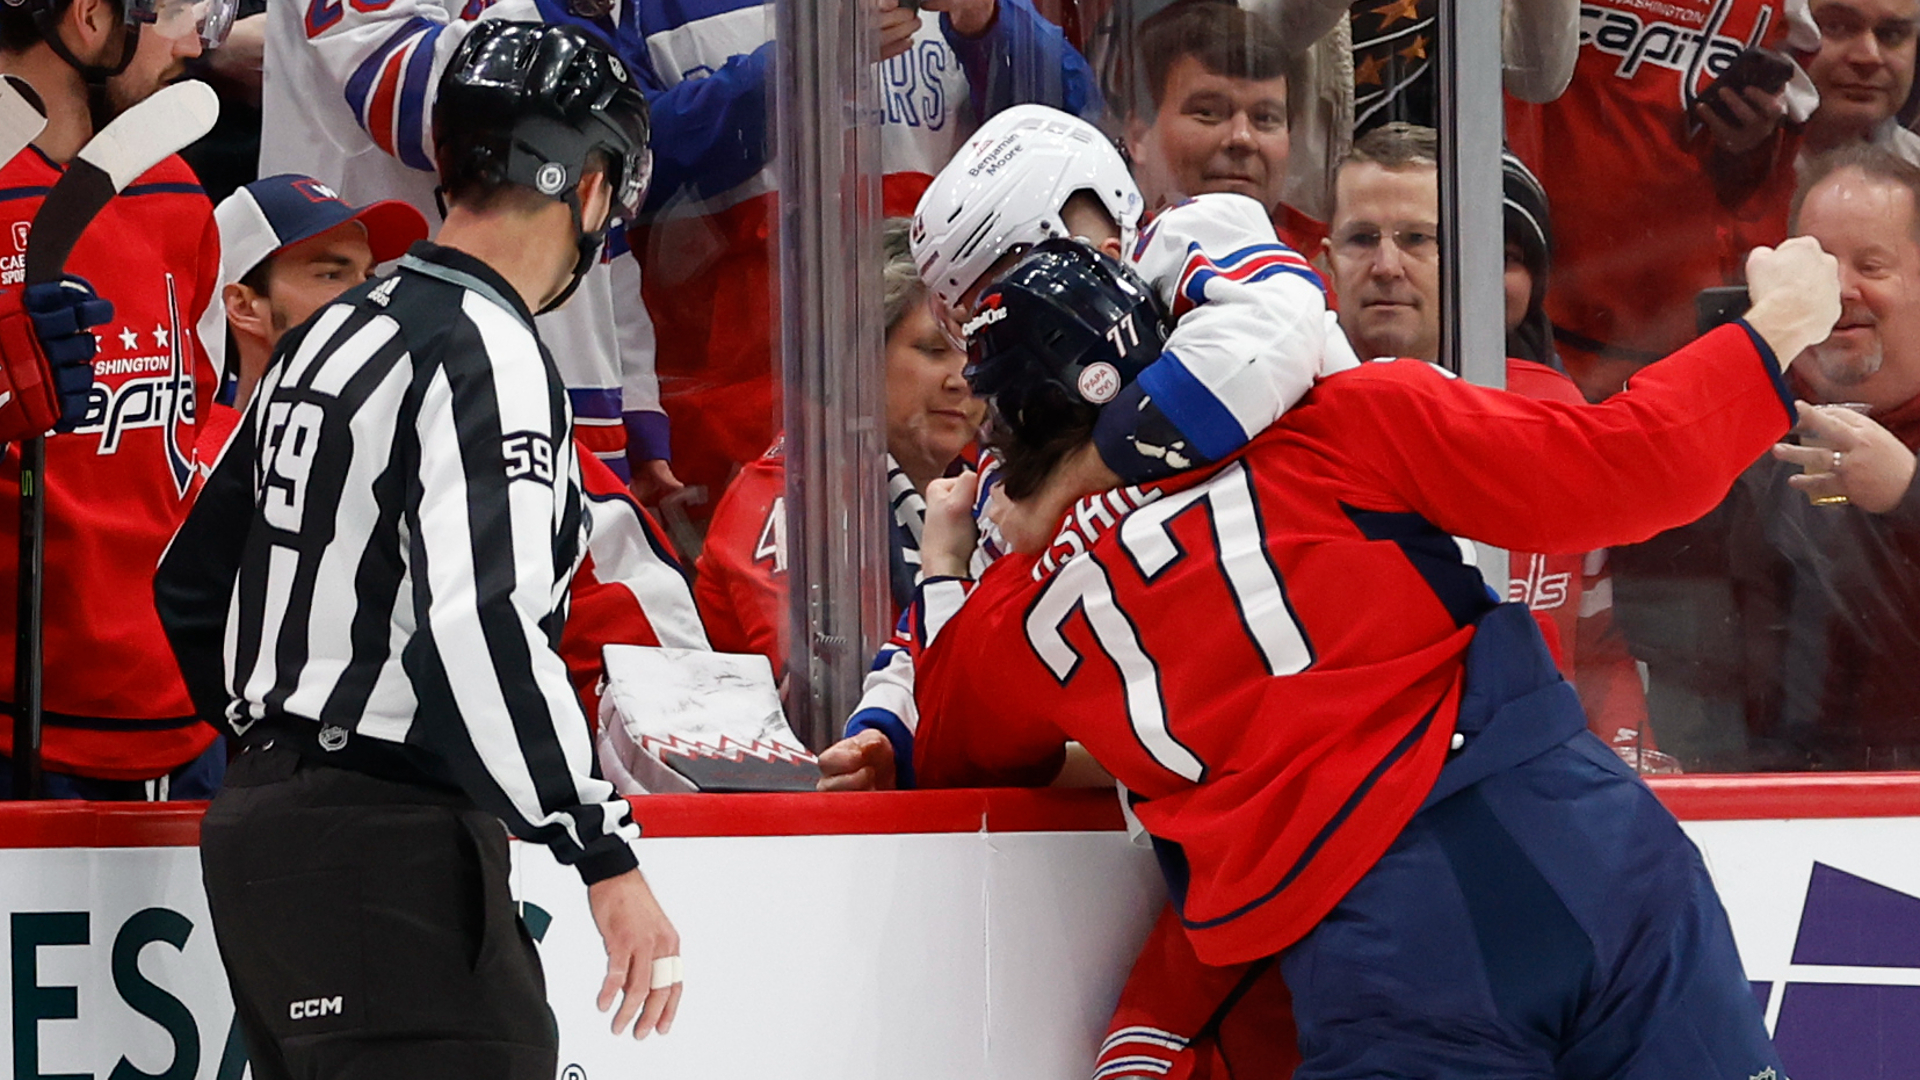 Capitals right wing T.J. Oshie fights Rangers center Barclay Goodrow